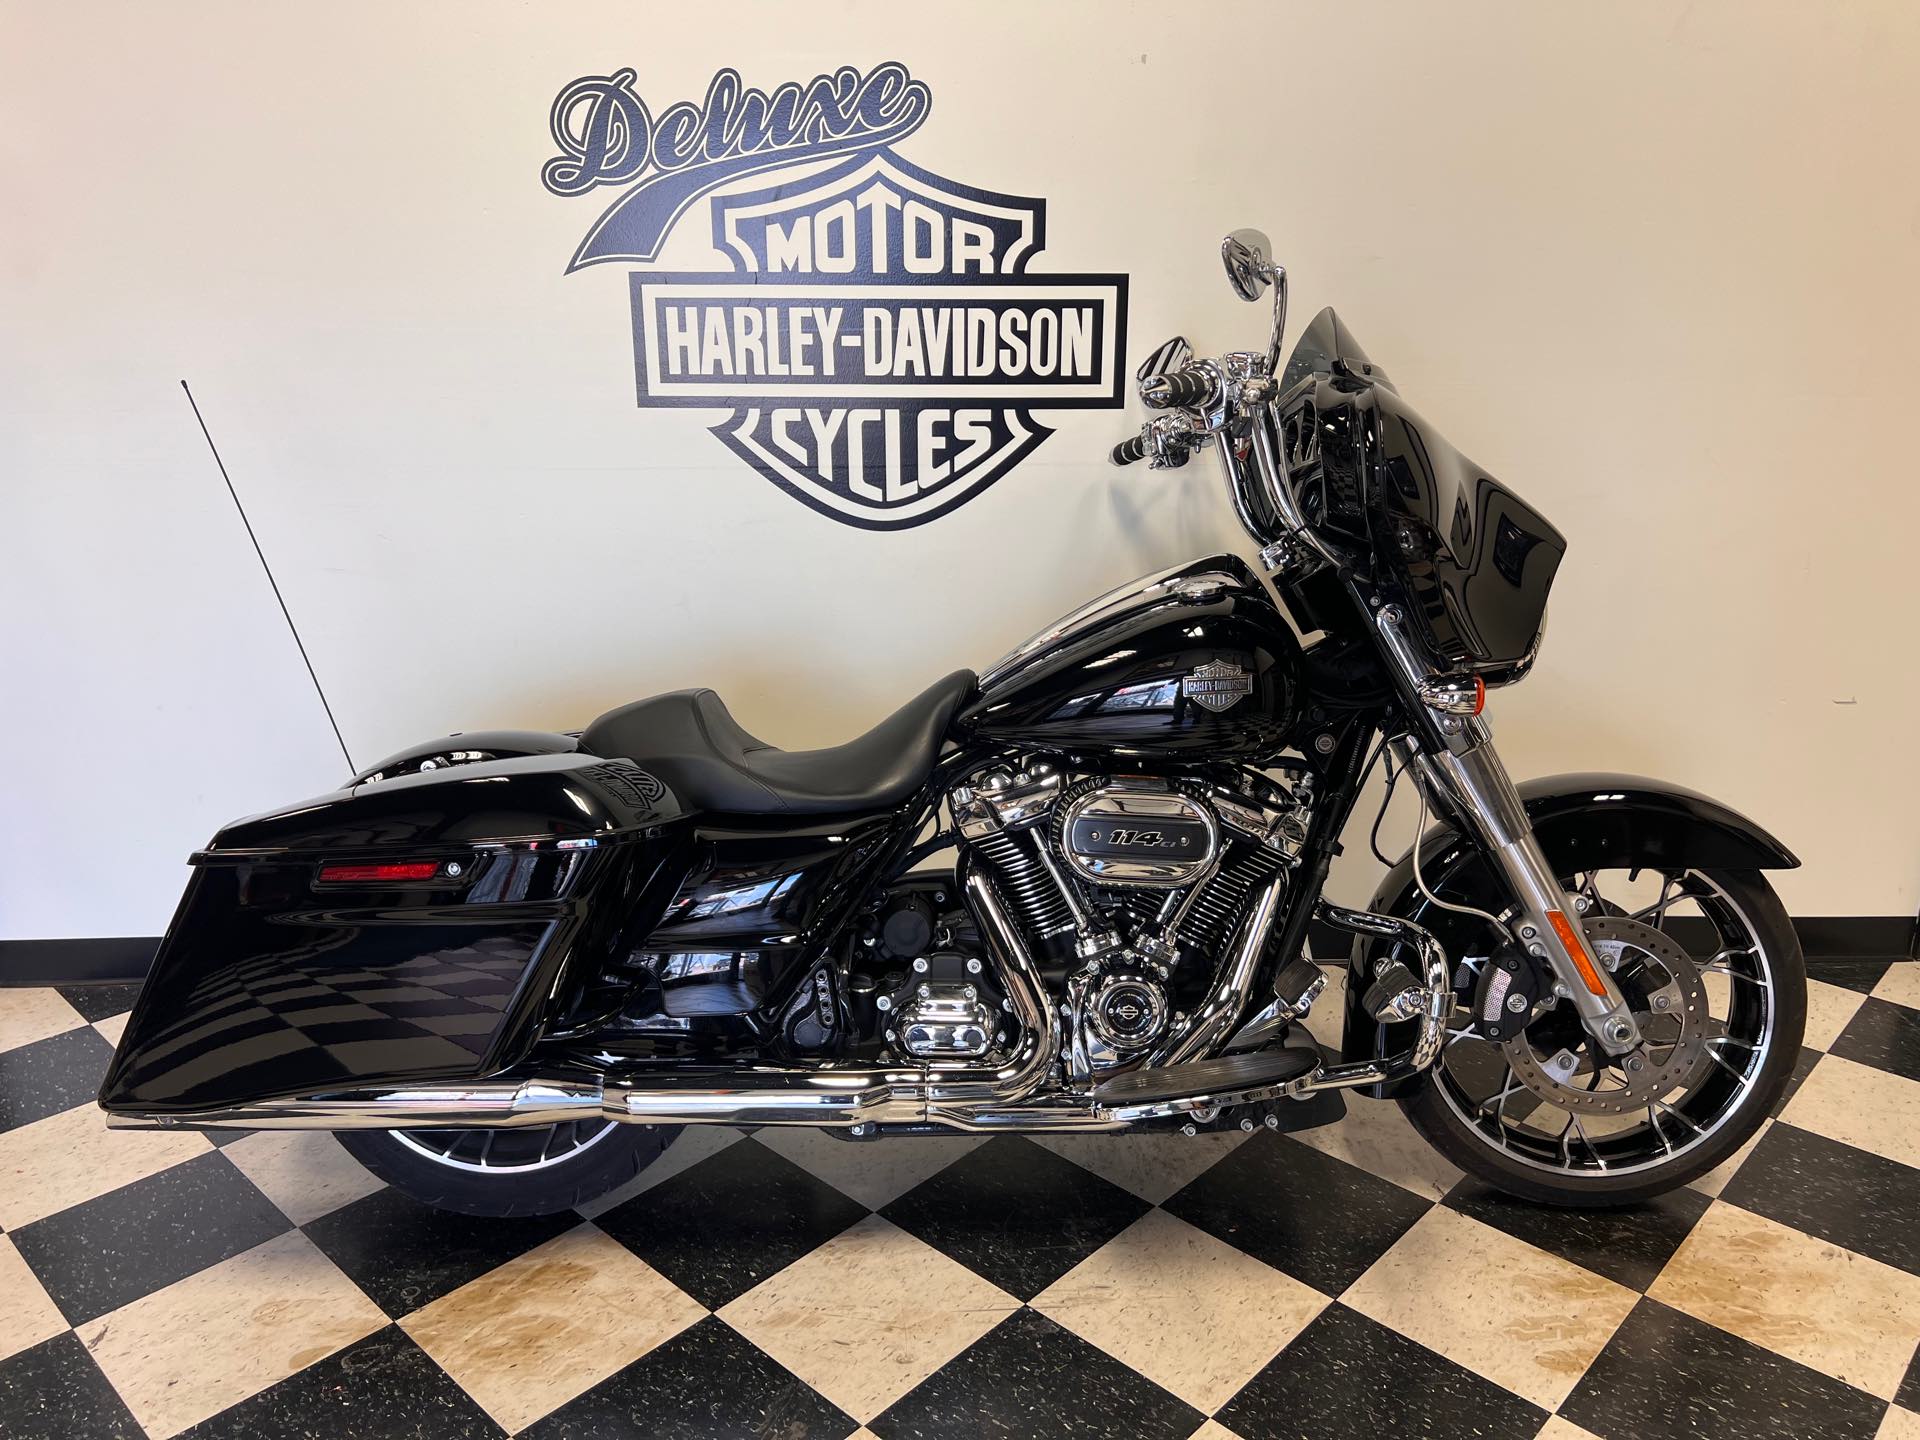 Our Harley-Davidson Street Inventory